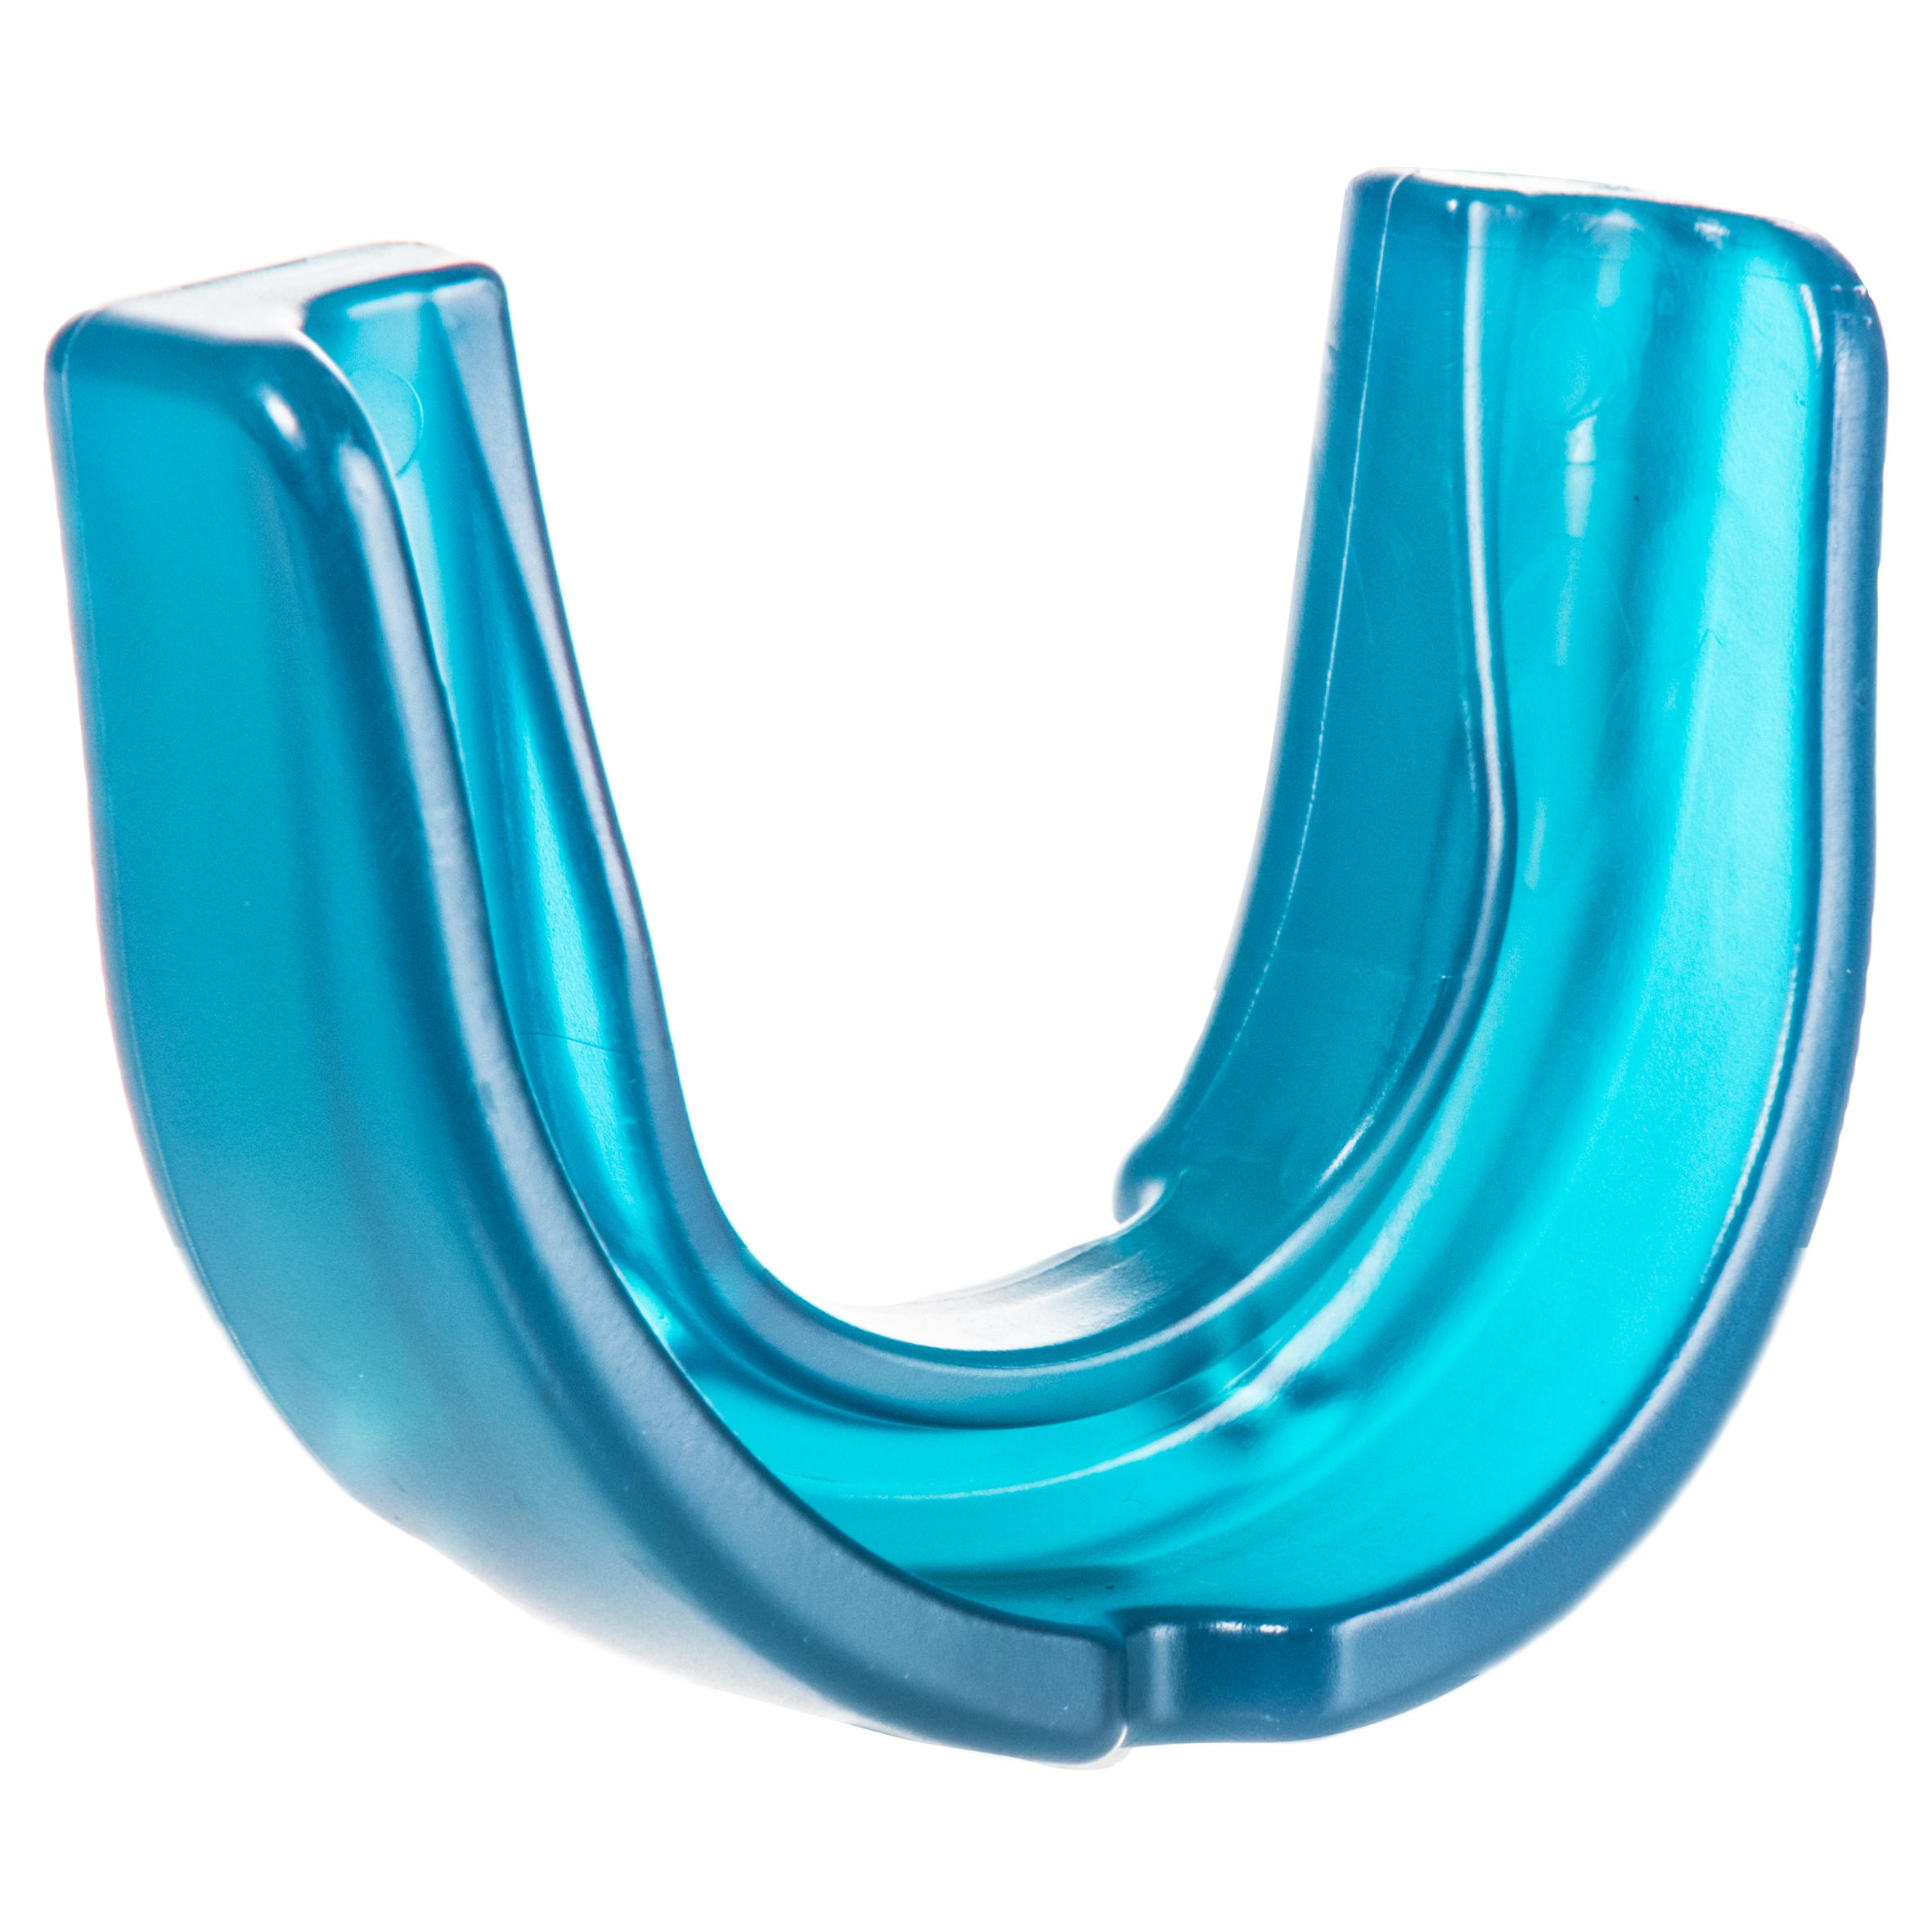 FH100 Adult Large Low-Intensity Field Hockey Mouthguard - Turquoise 3/9